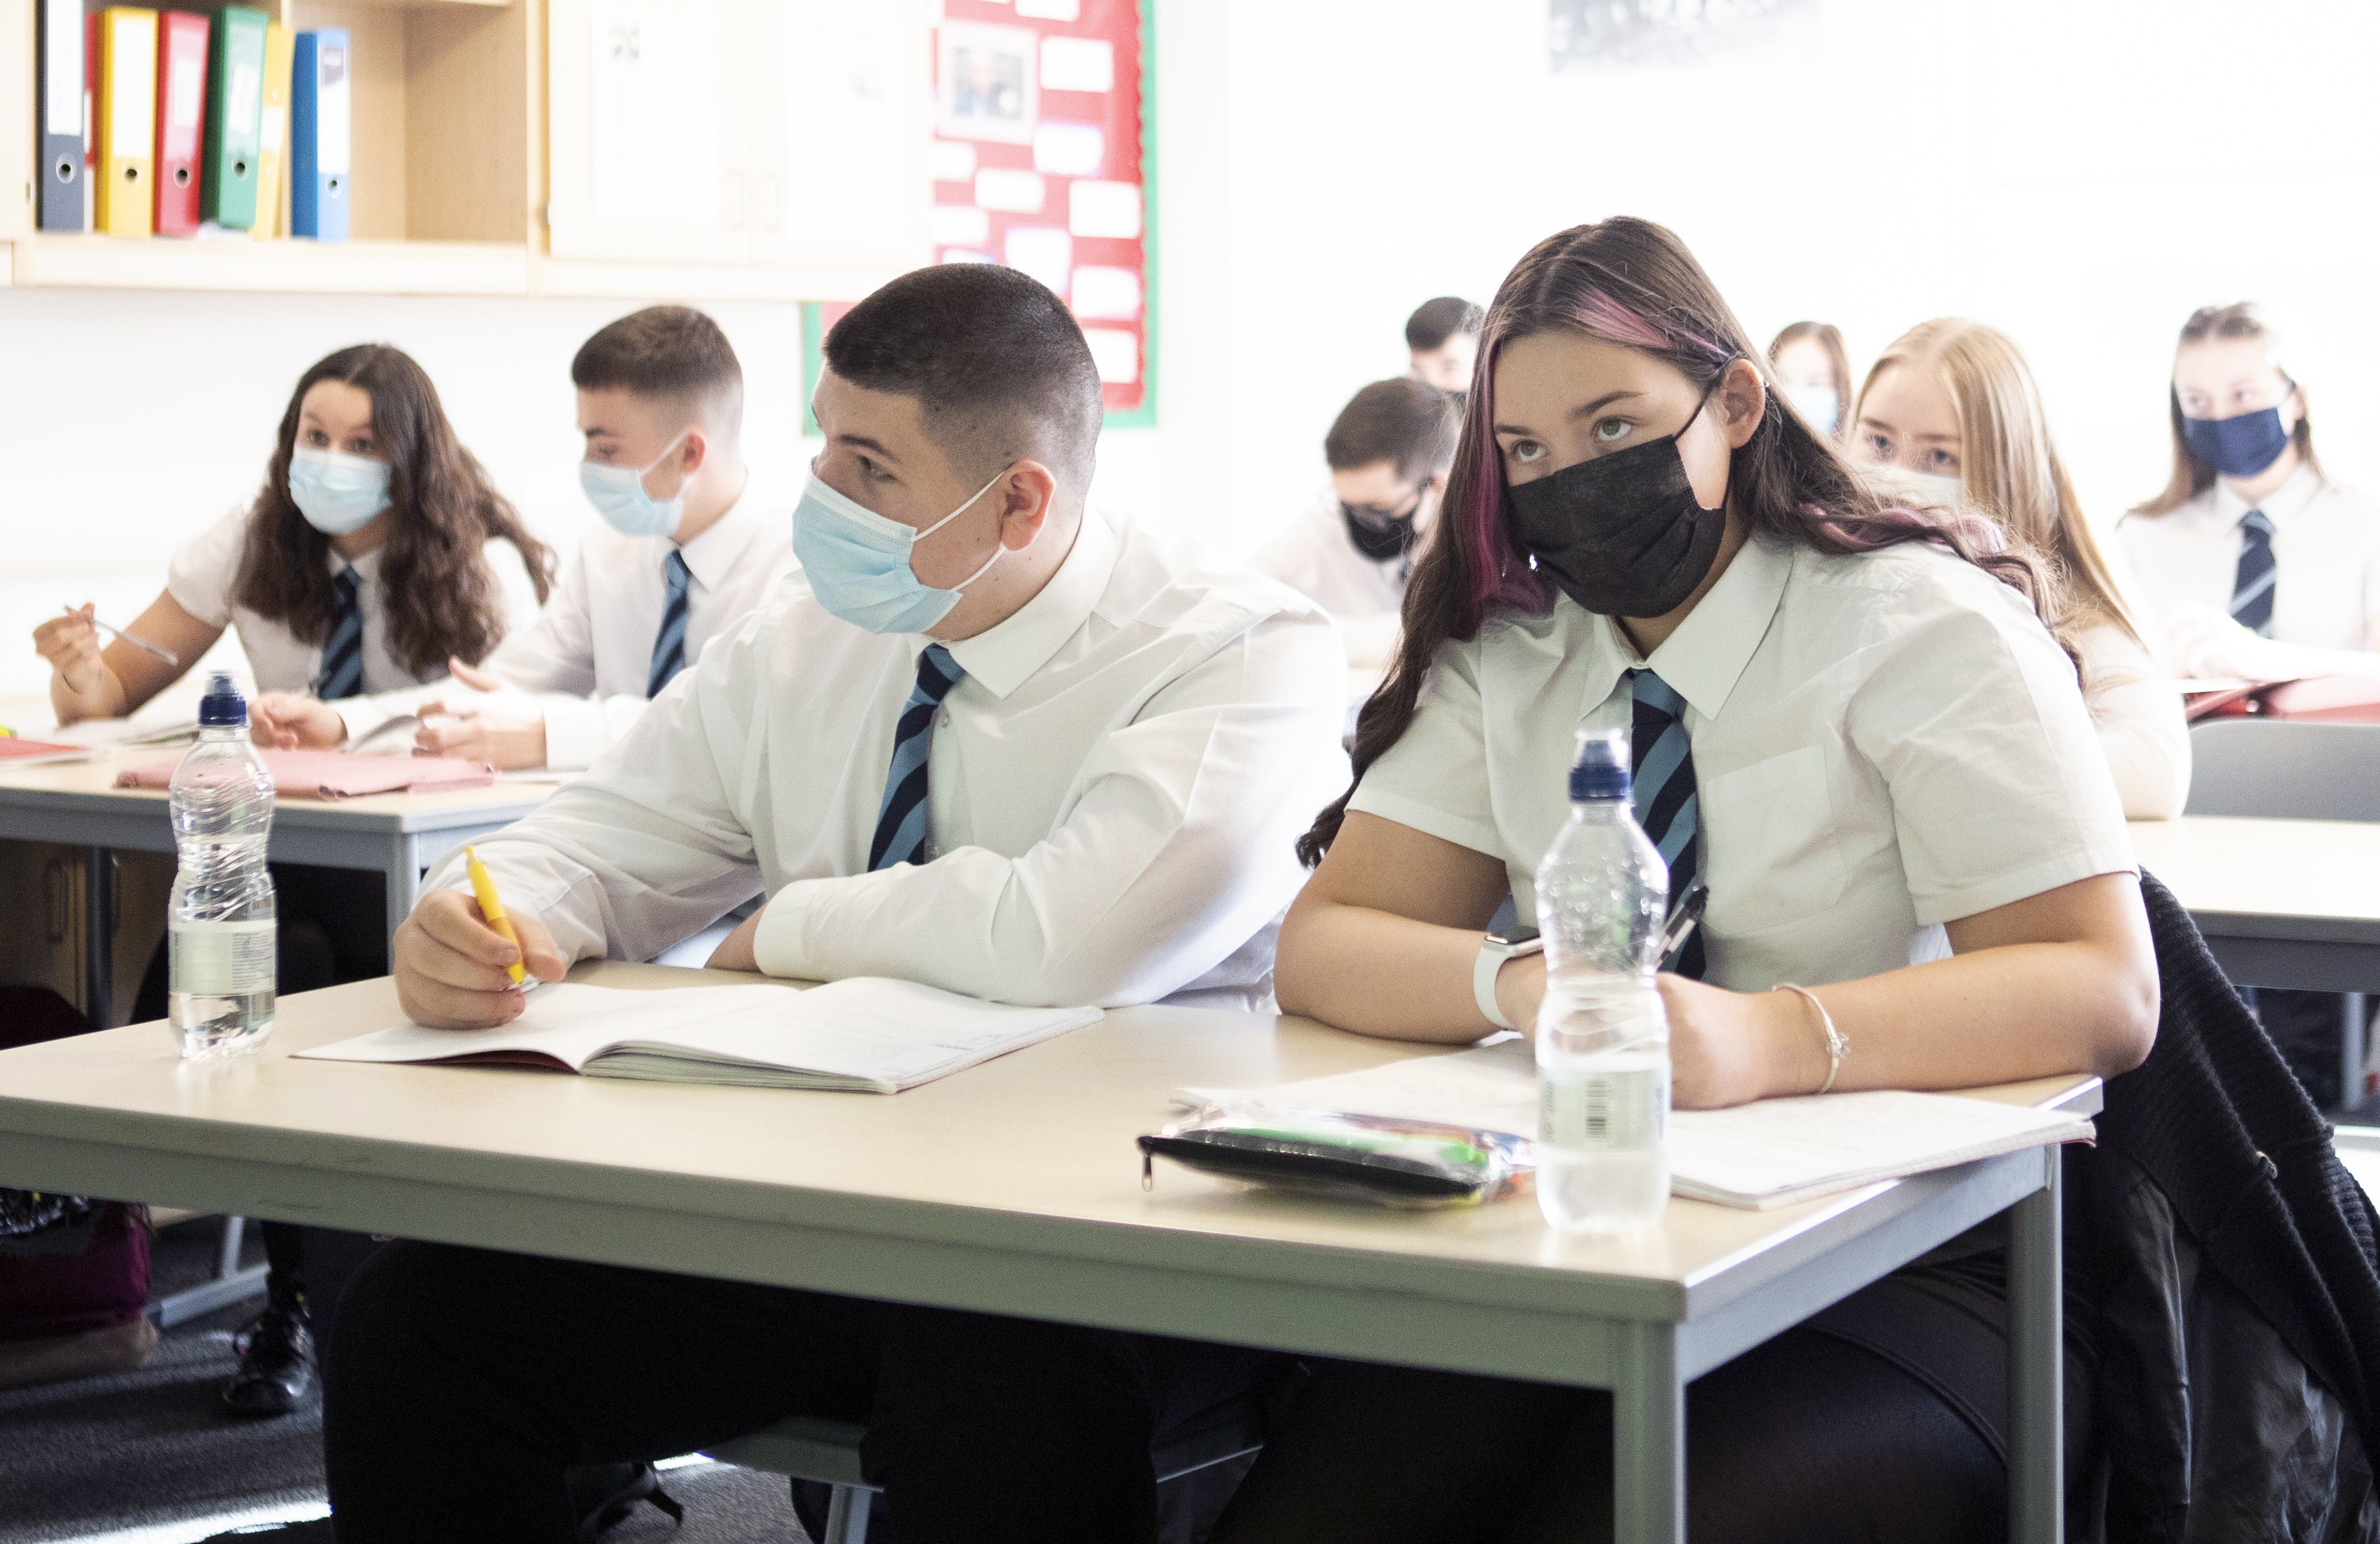 Secondary school pupils in England will be asked to wear face coverings in the classroom (Jane Barlow/PA)